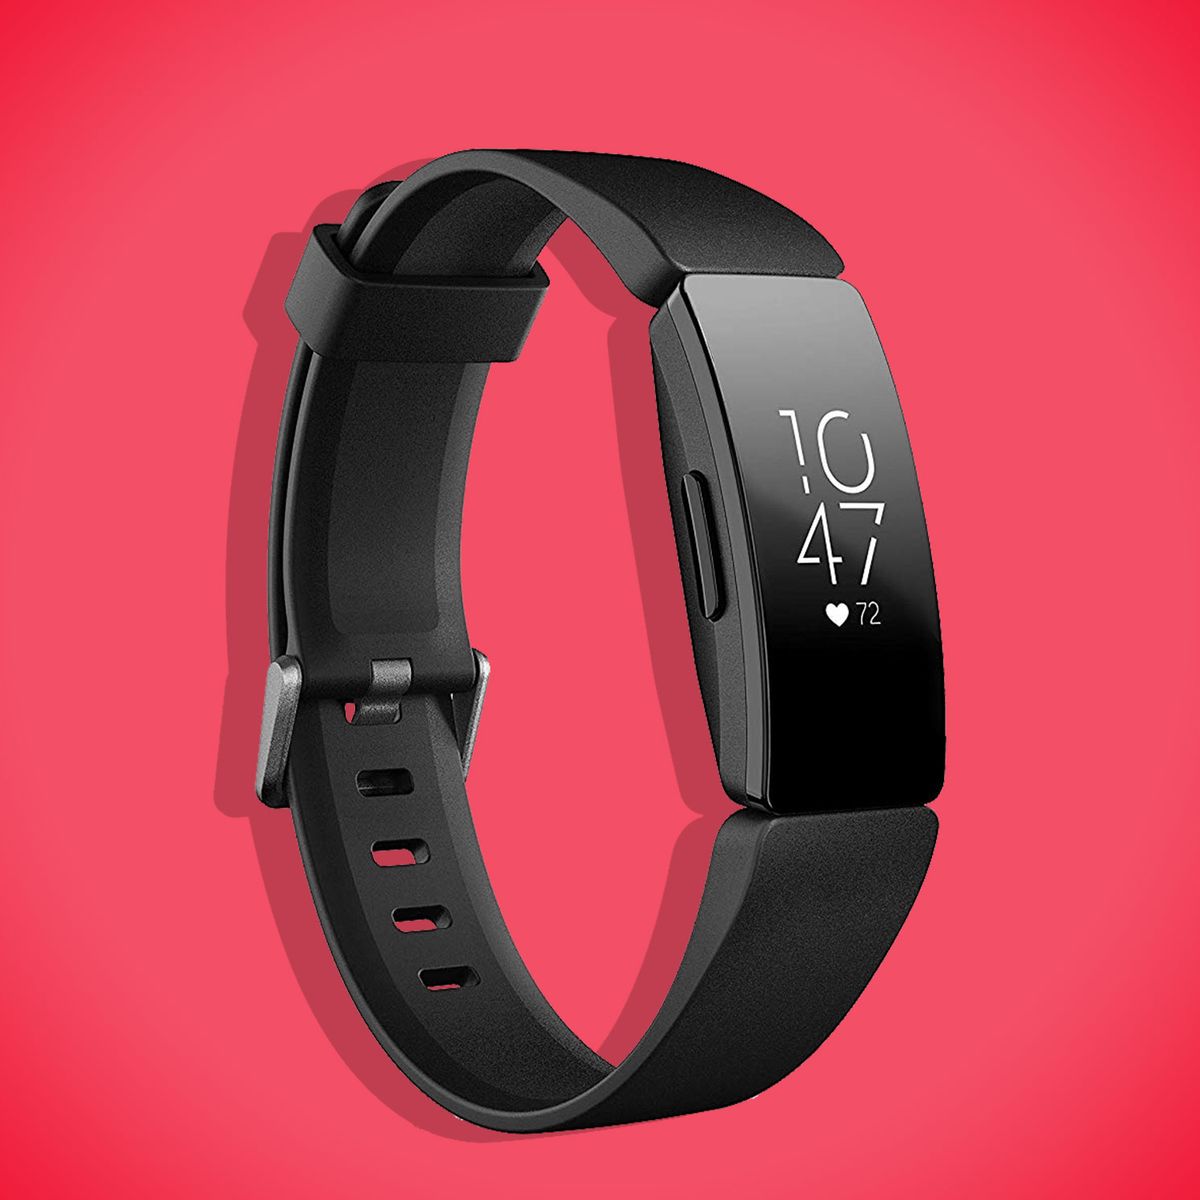 cheapest fitbit model